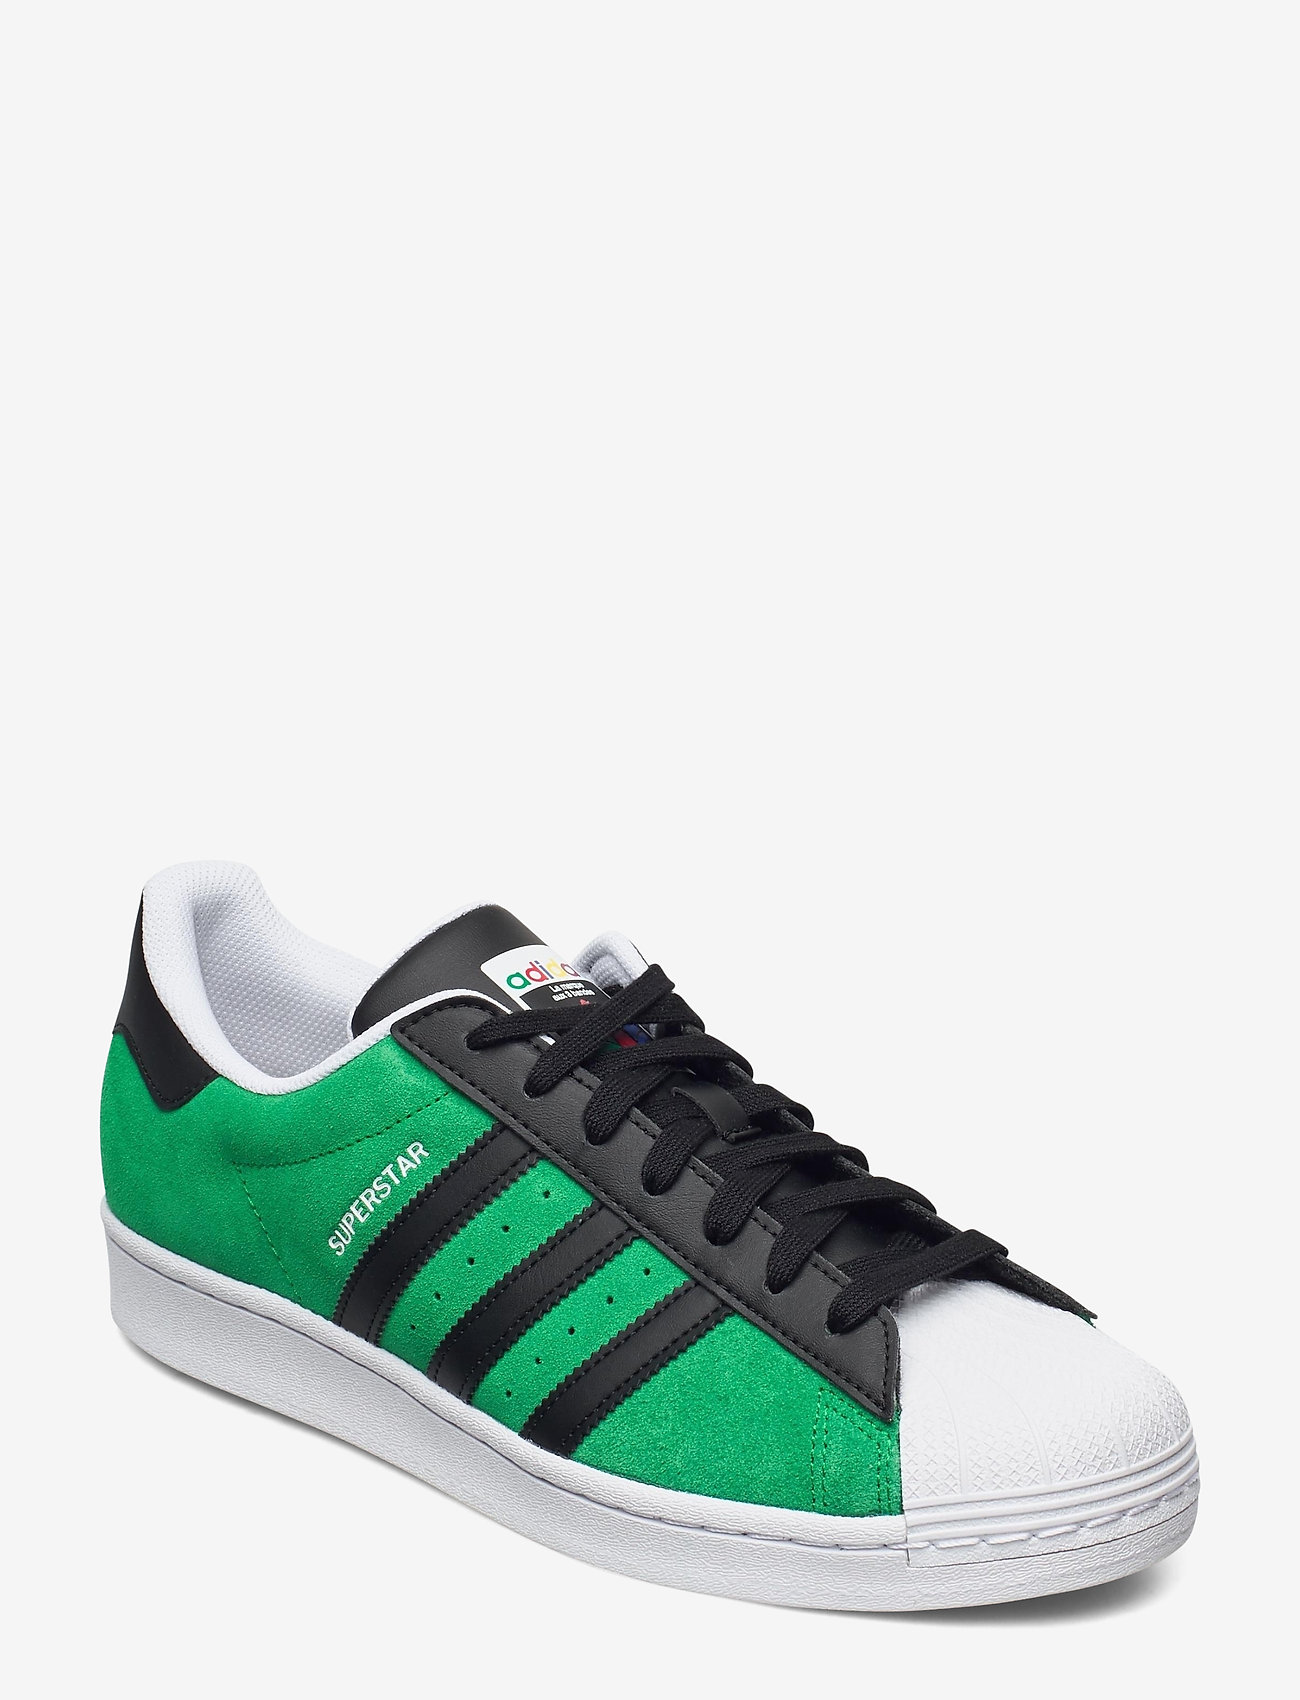 adidas superstar shoes black red yellow green